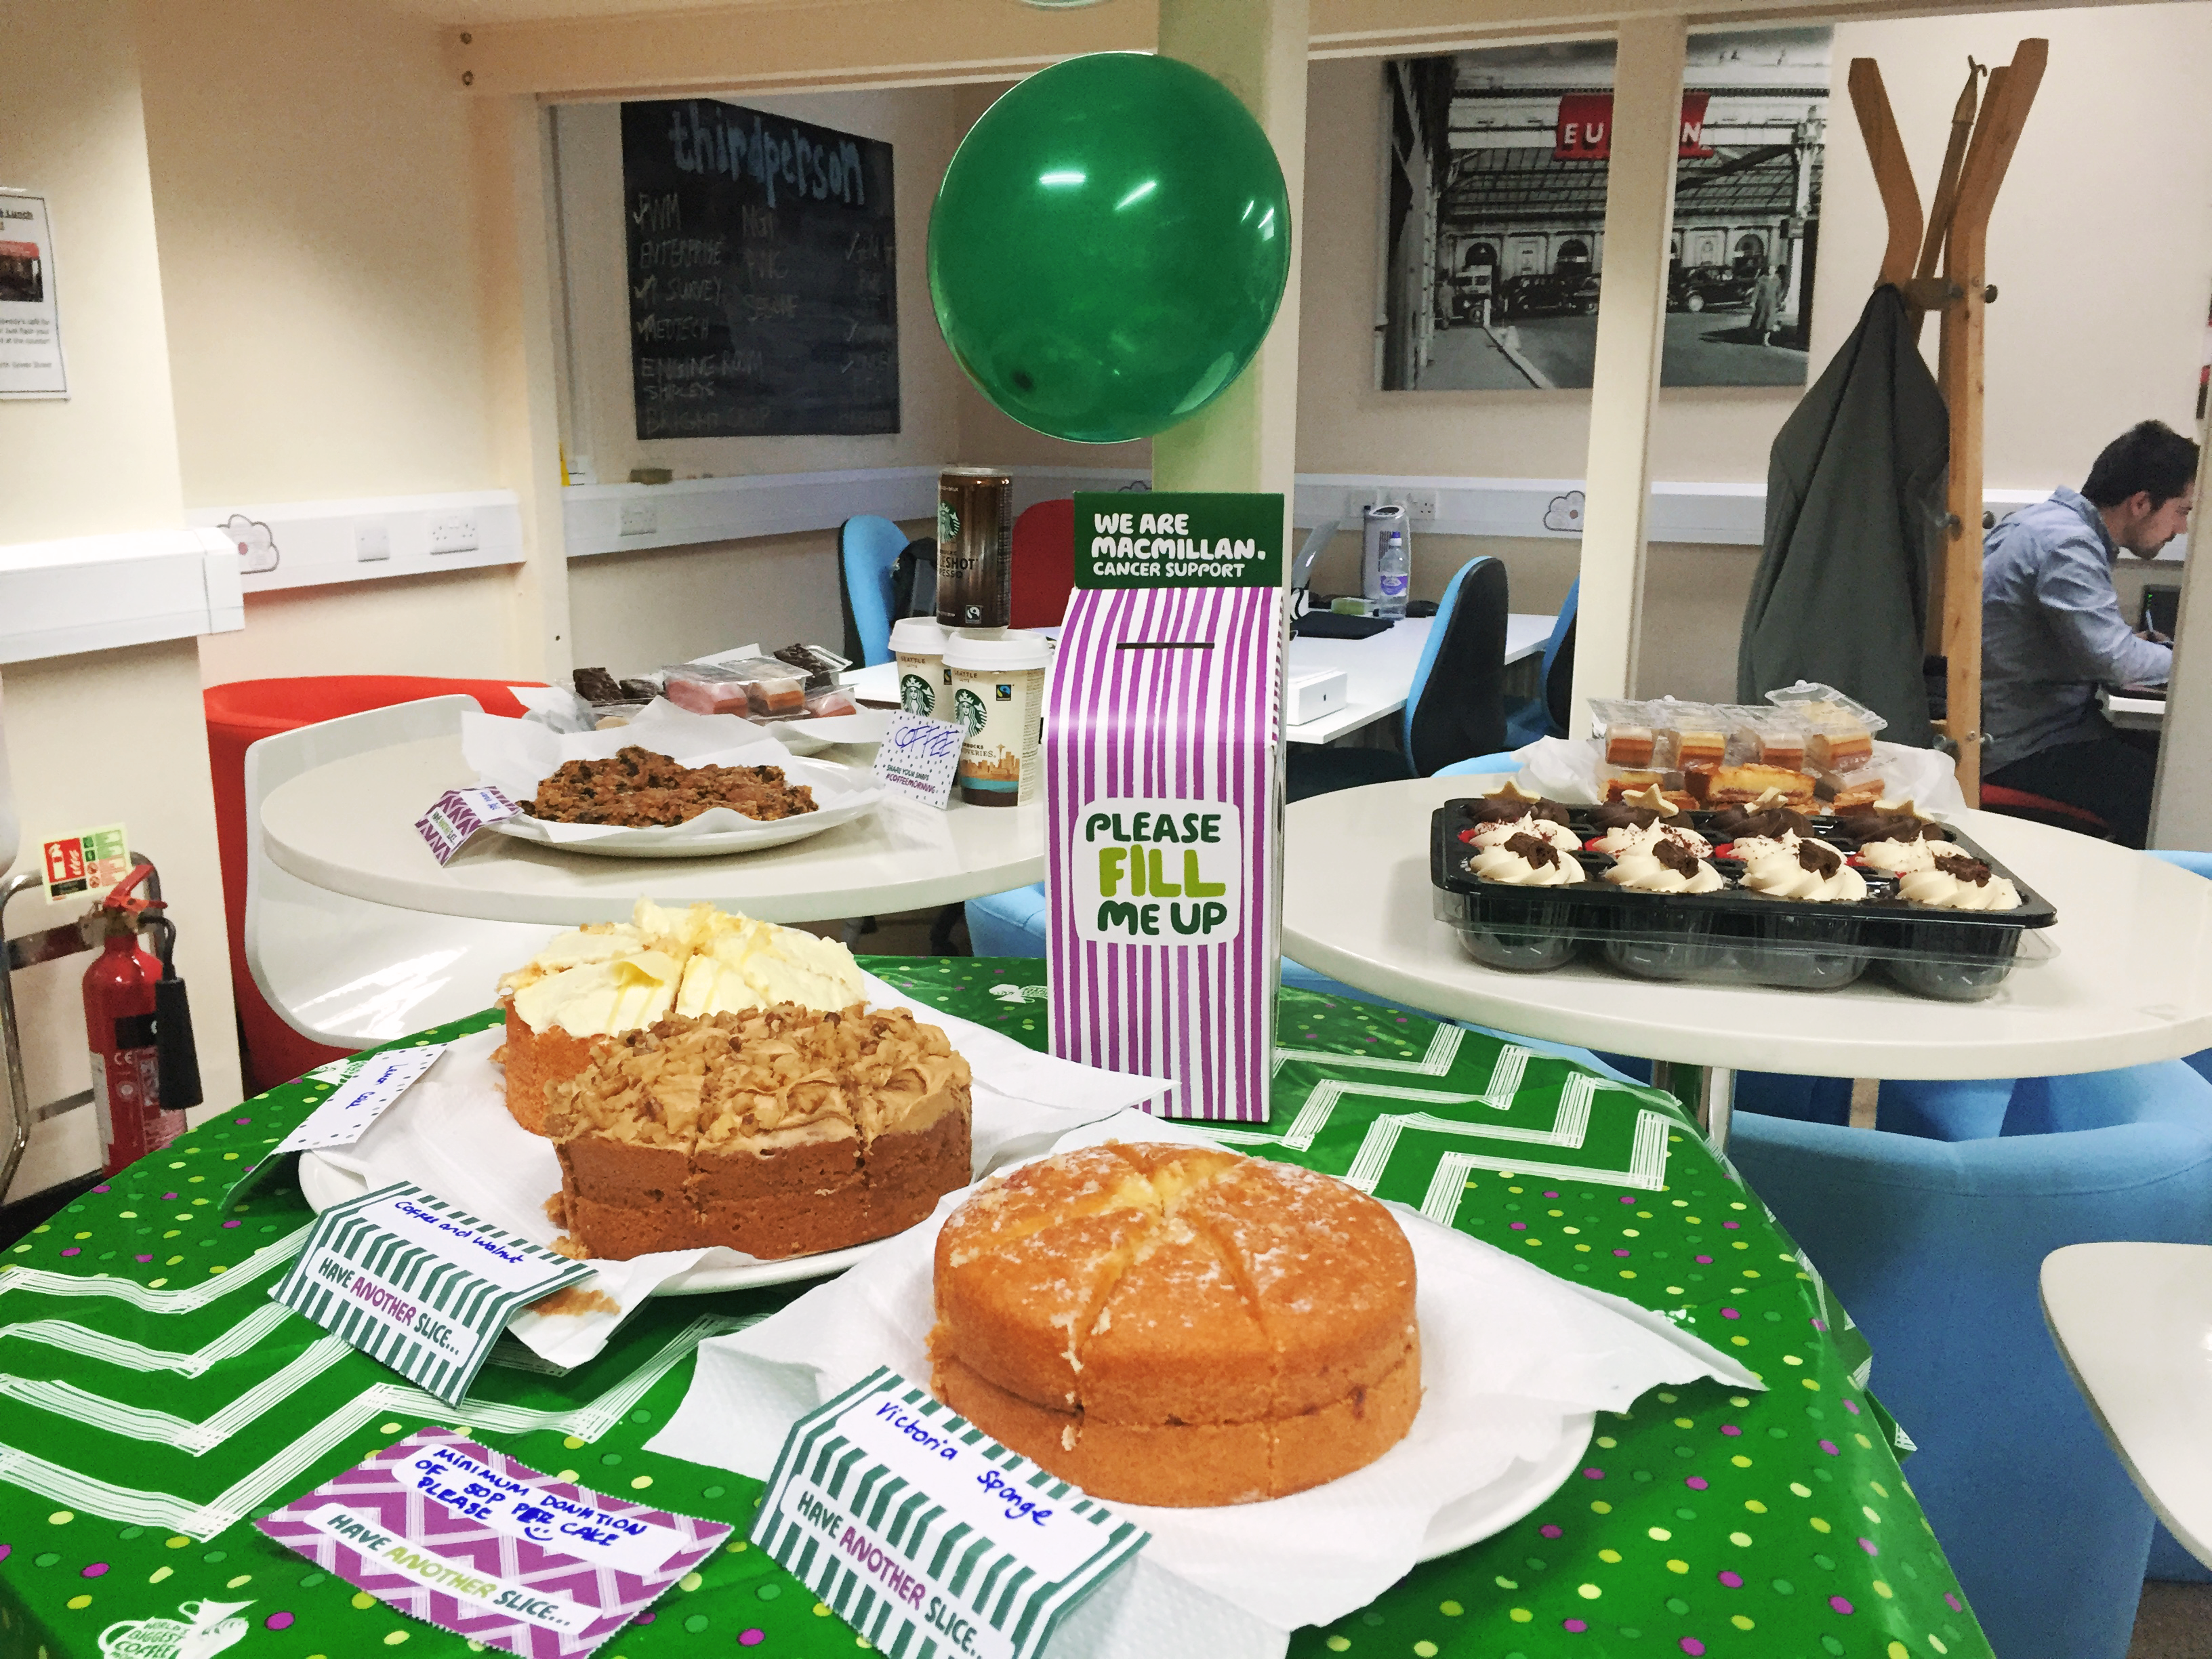 Bake It or Fake It for Macmillan Cancer Support!